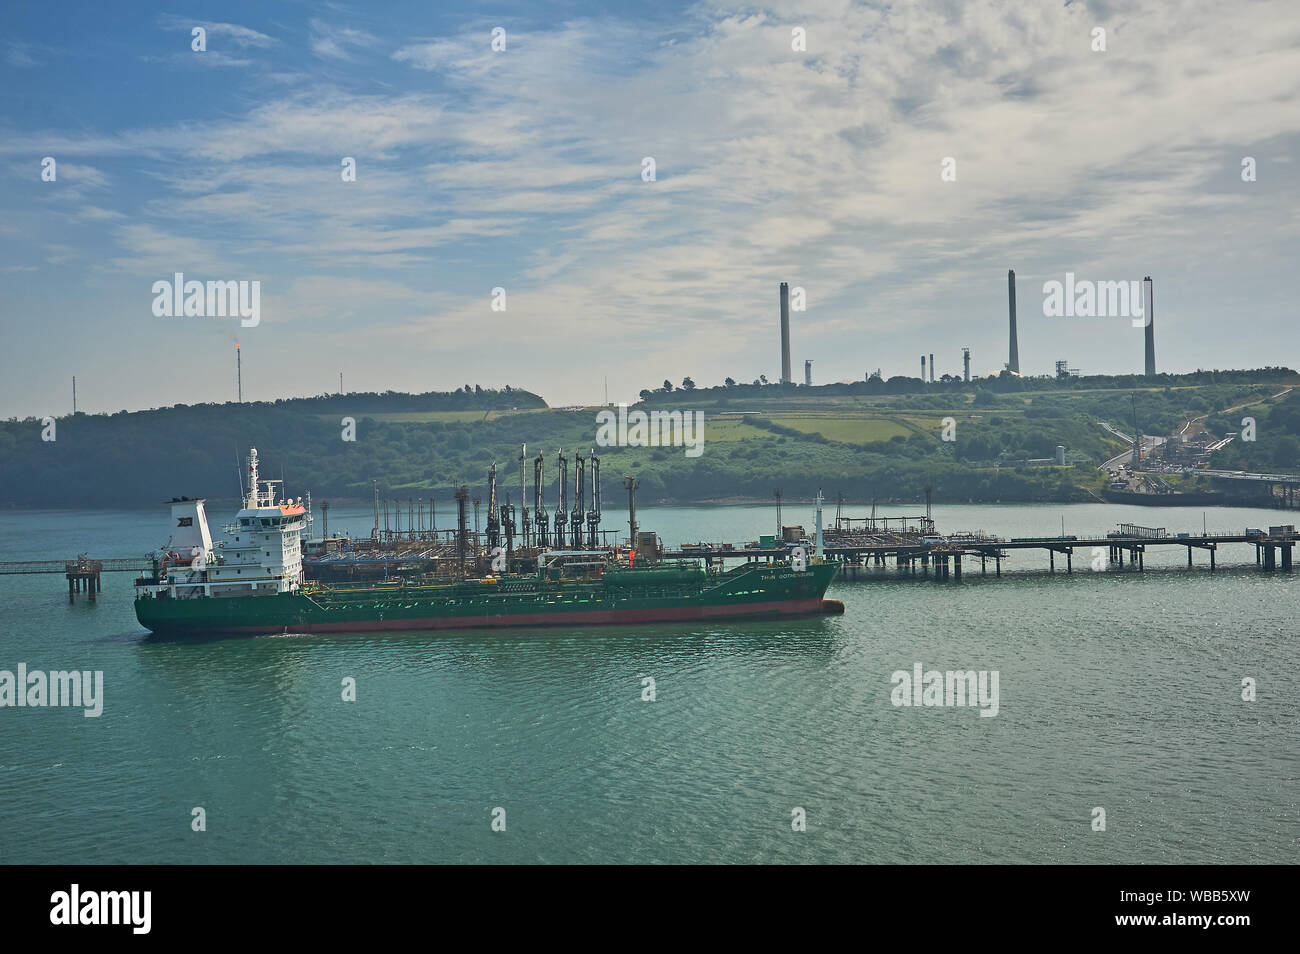 Oil and petro-chemical tankers moored to pontoons serving Milford Haven refineries in South Wales. Stock Photo